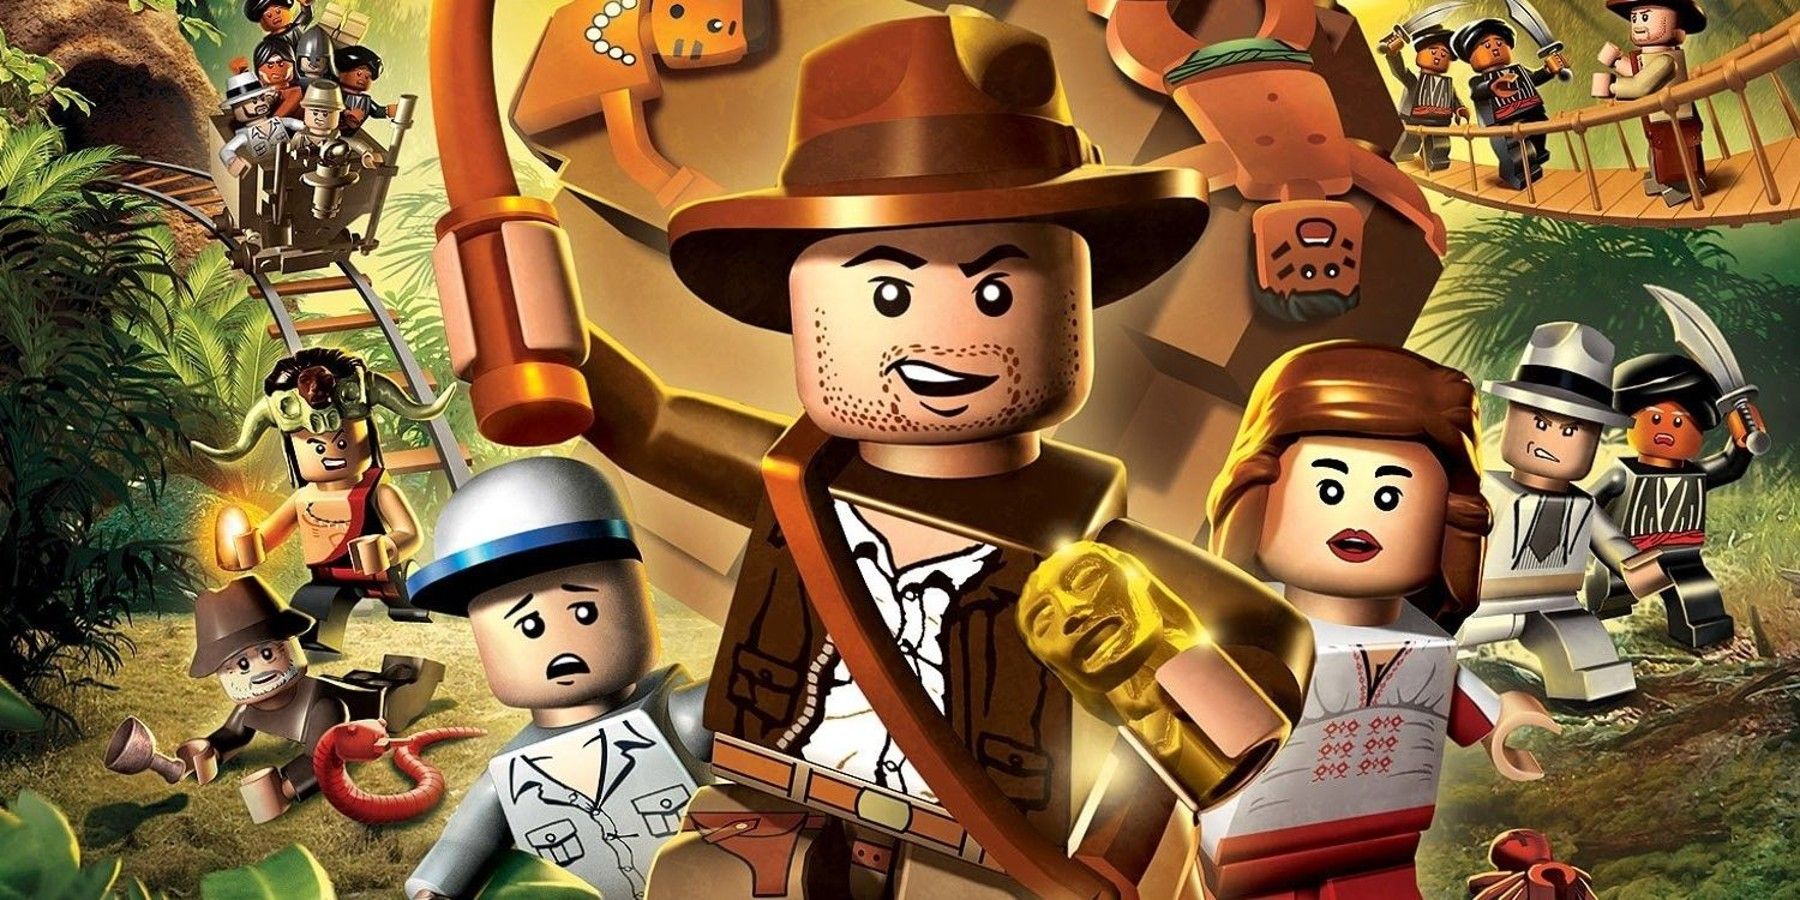 LEGO Indiana Jones 3 Could Finally Do the Entire Series Justice